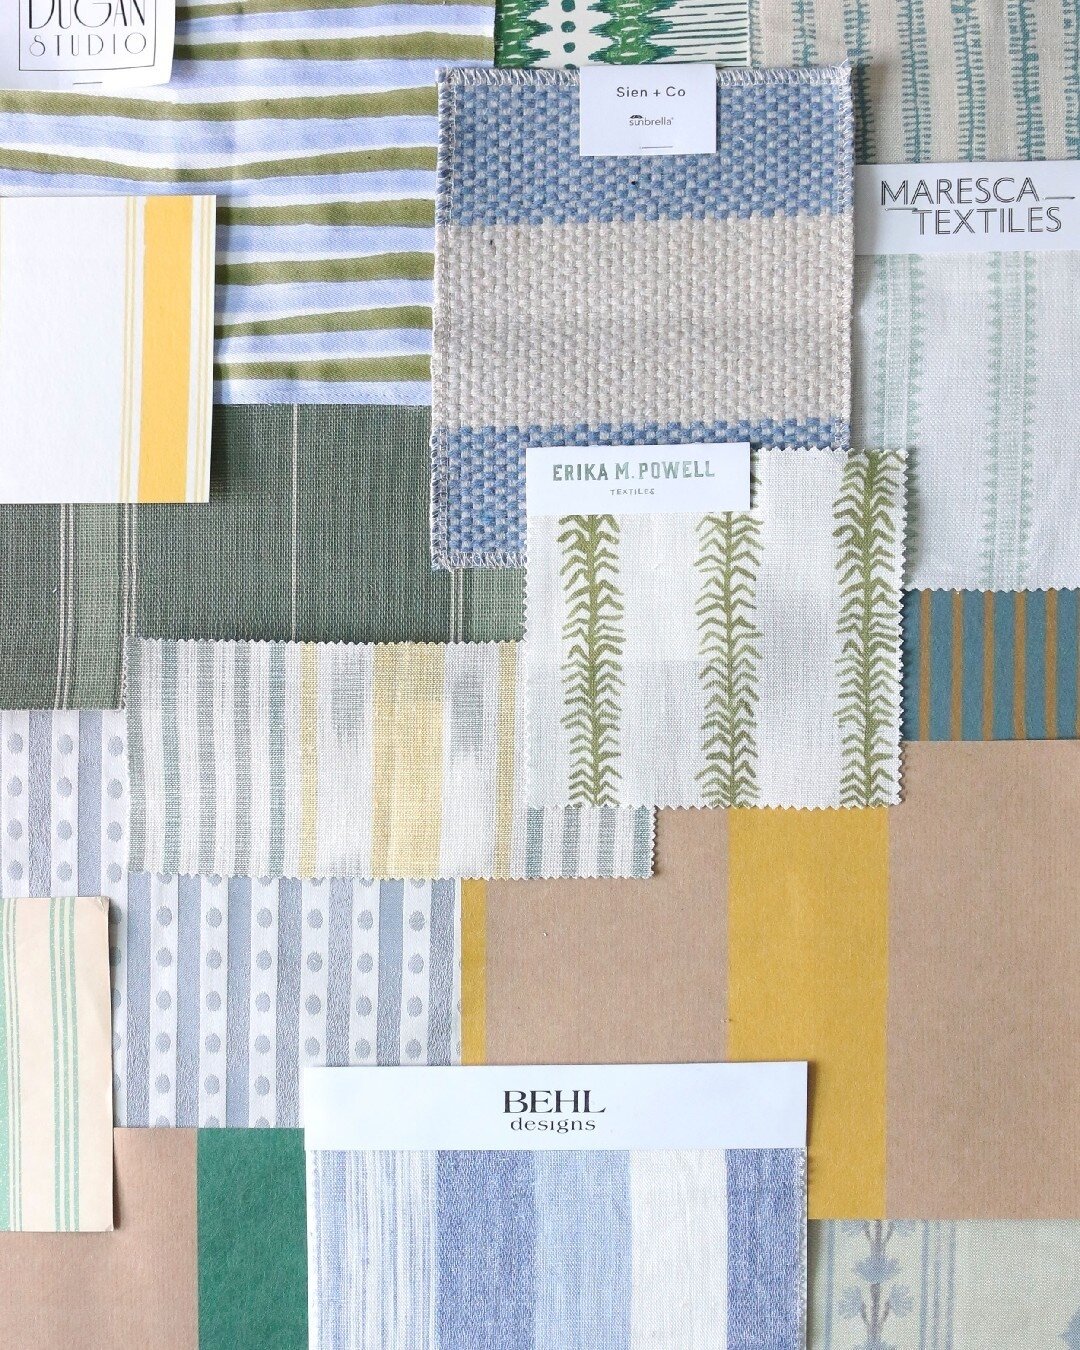 A new take on stripes 🤩 All these textiles and more available at @fritzporterchs⁠
⁠
textiles from @marescatextiles, @sienandco, @serenadugan, @behldesigns, @thevalelondon, @erikampowelltextiles, @hamiltonwestonwallpapersltd, @august.abode, @faycetex